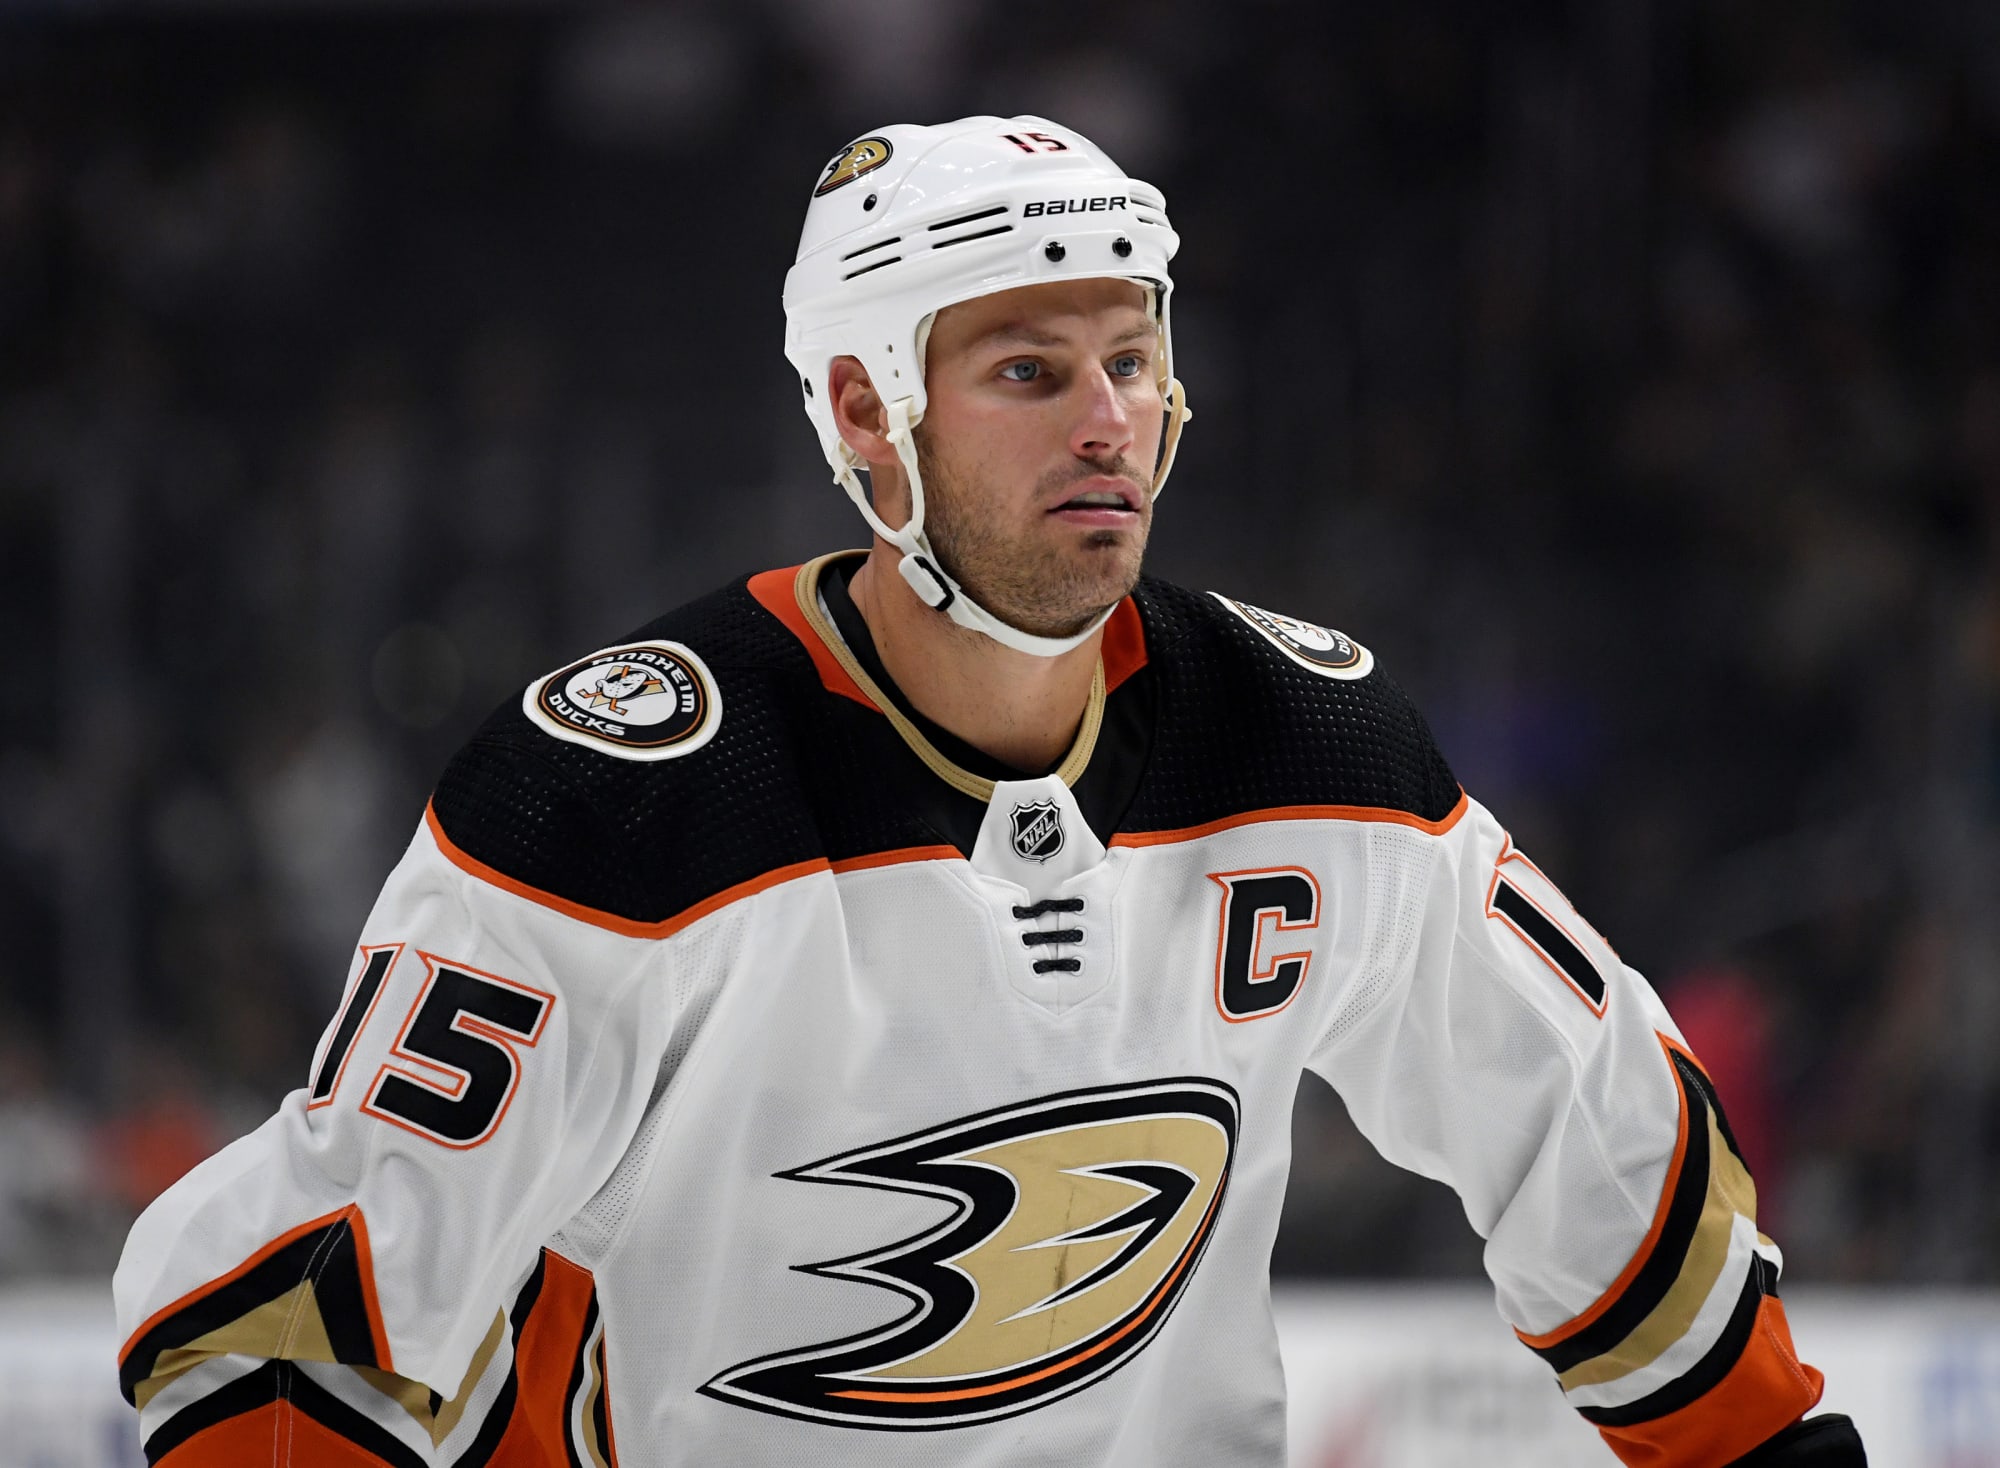 Anaheim Ducks: Is it Time to Find Ryan Getzlaf's Replacement?